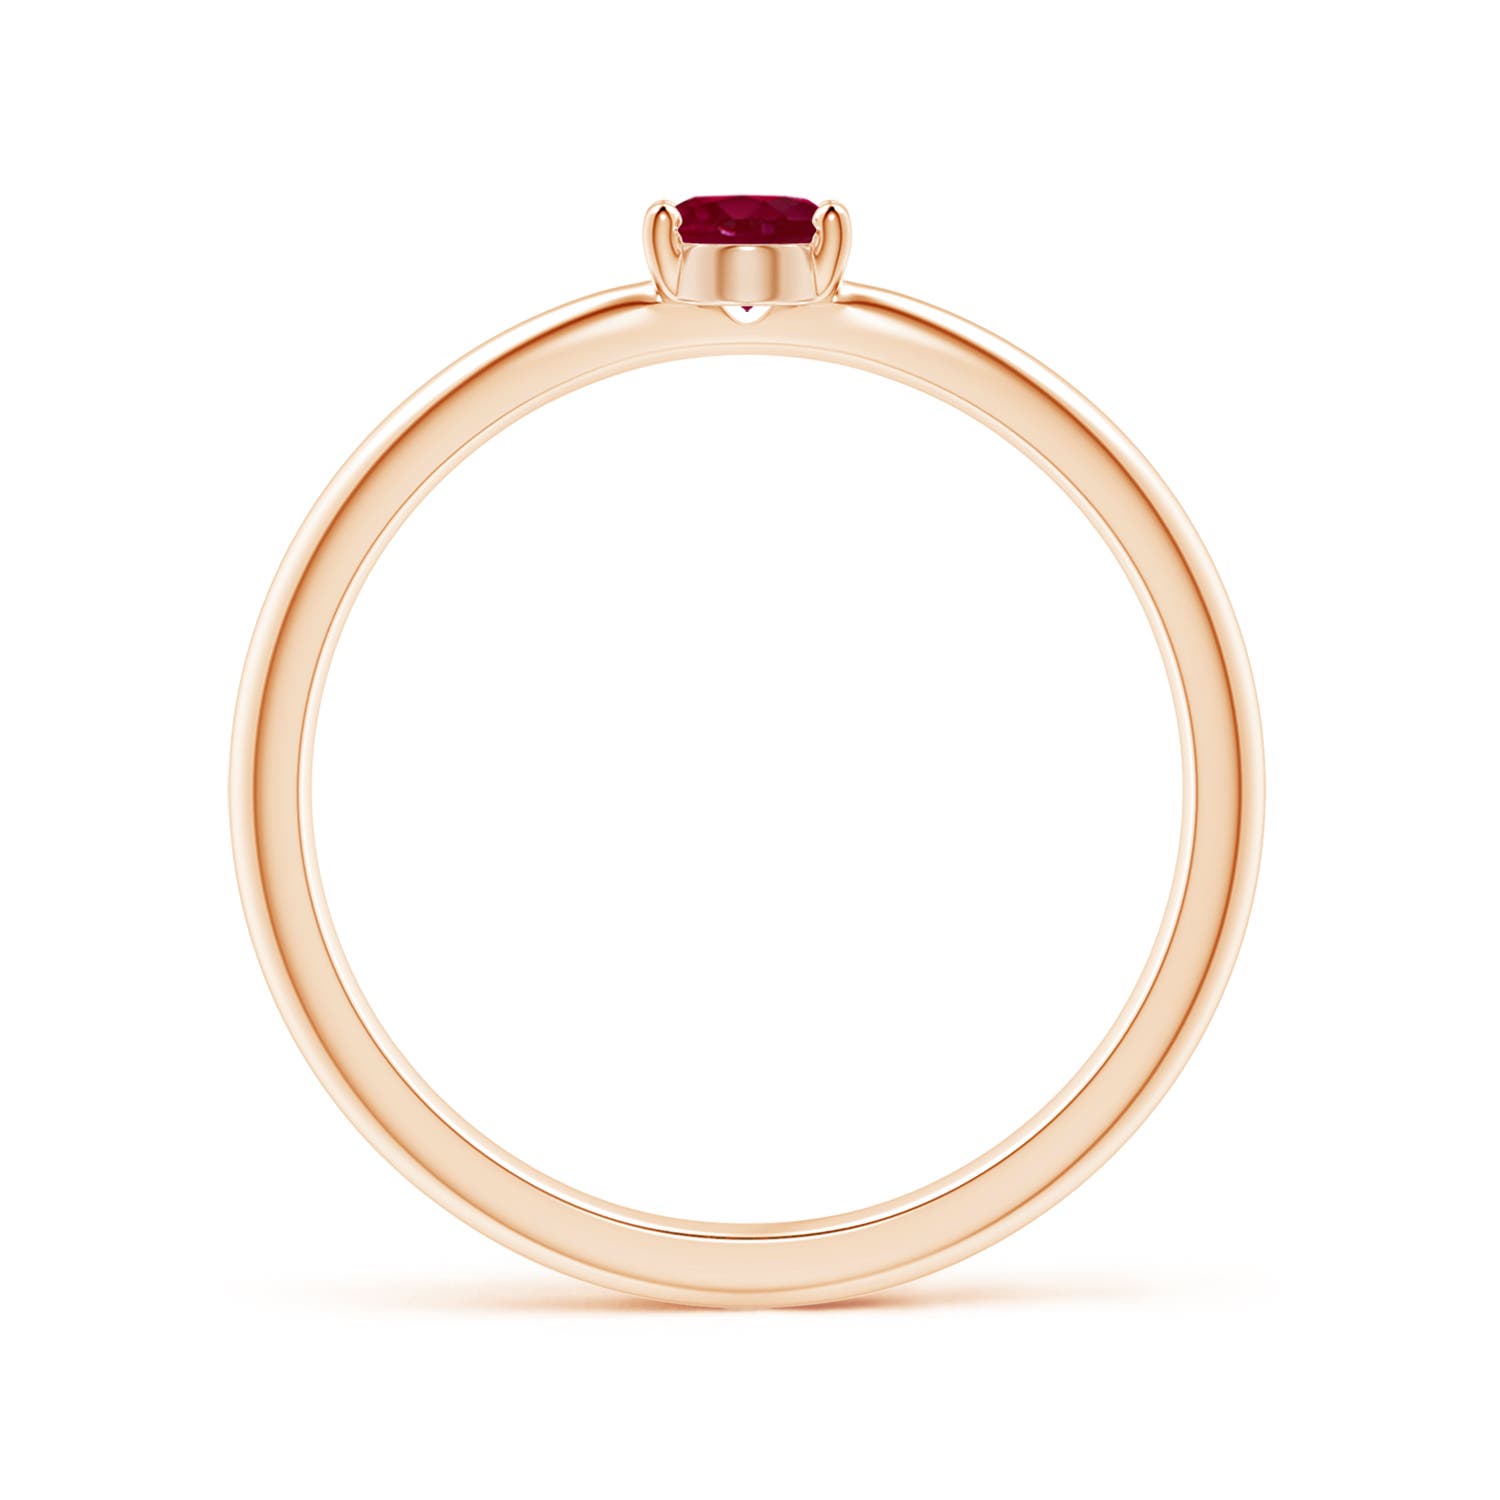 A - Ruby / 0.4 CT / 14 KT Rose Gold